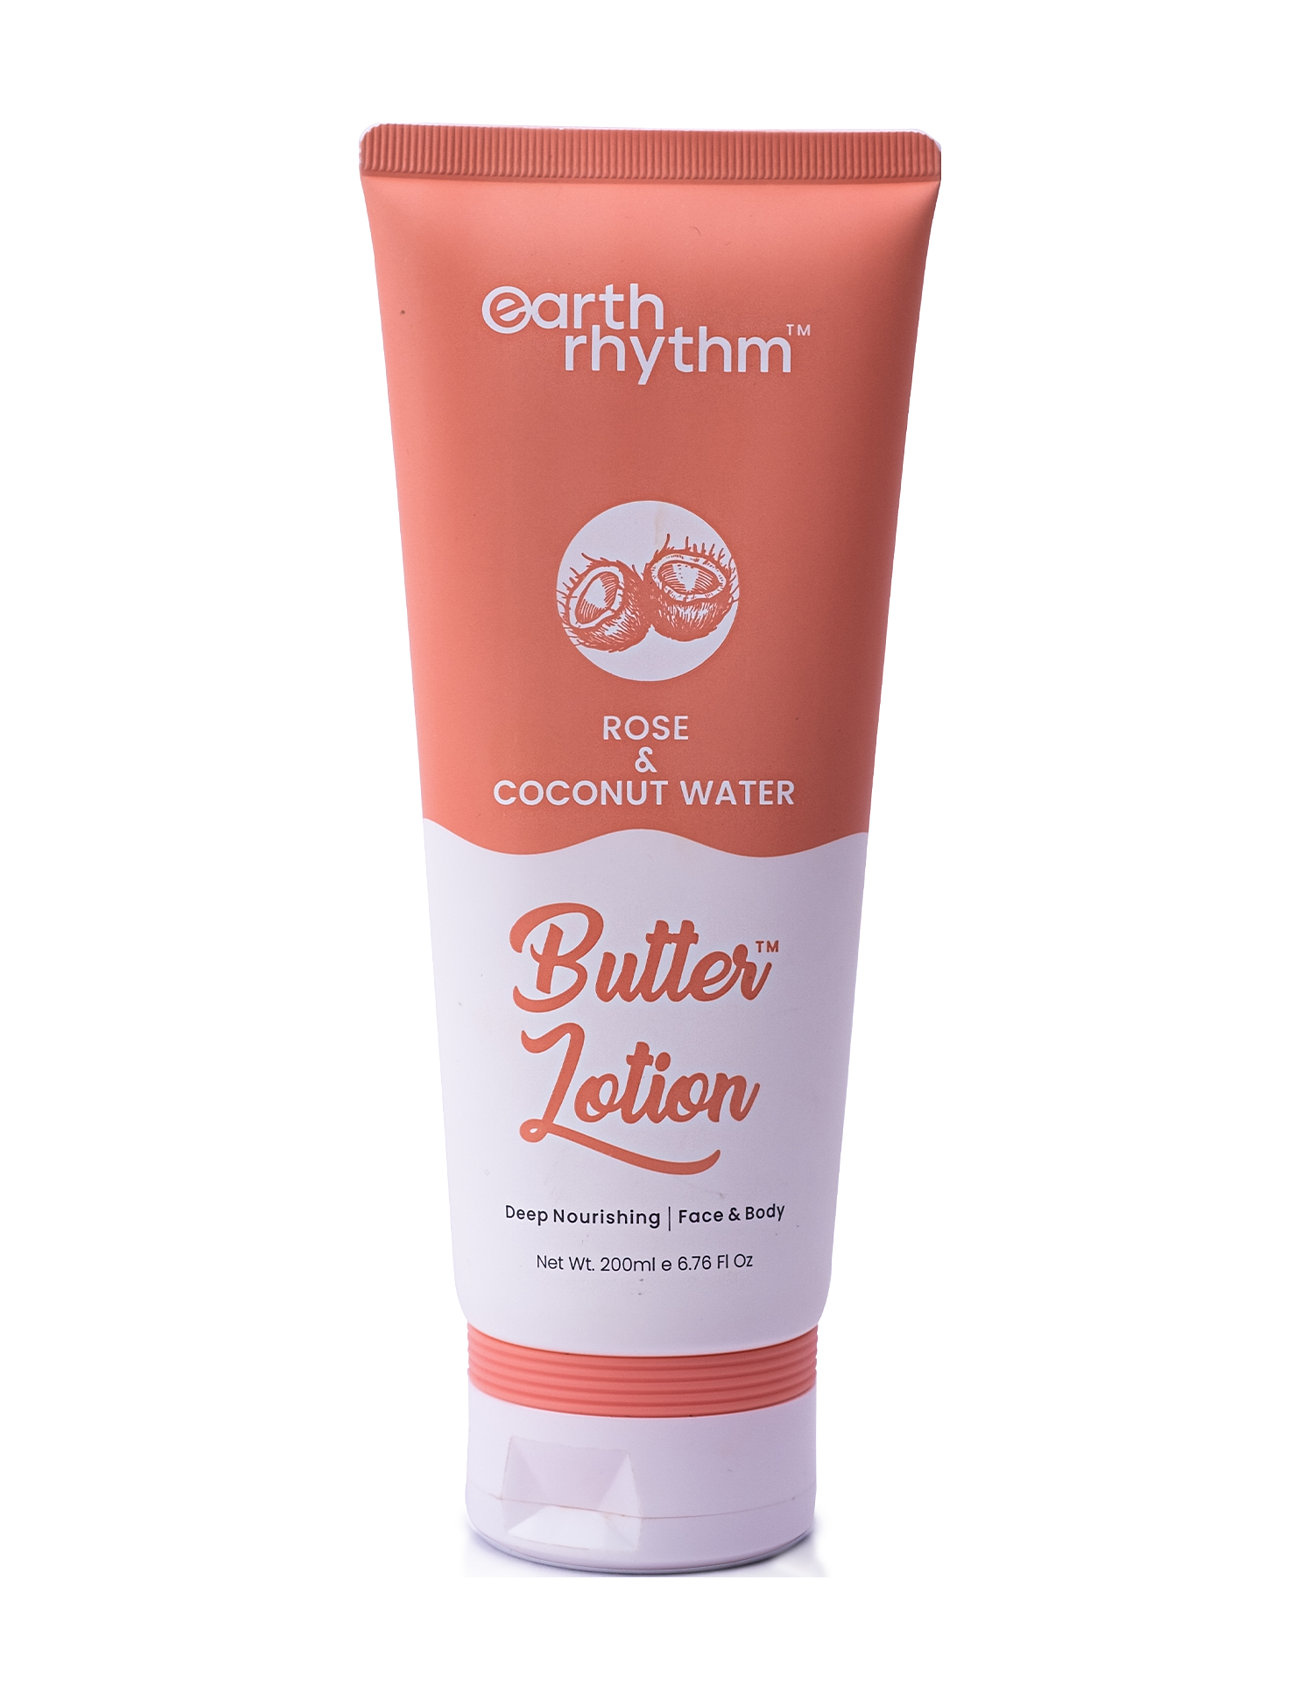 Rose & Coconut Water Butter Body Lotion Hudkräm Lotion Bodybutter Nude Earth Rhythm